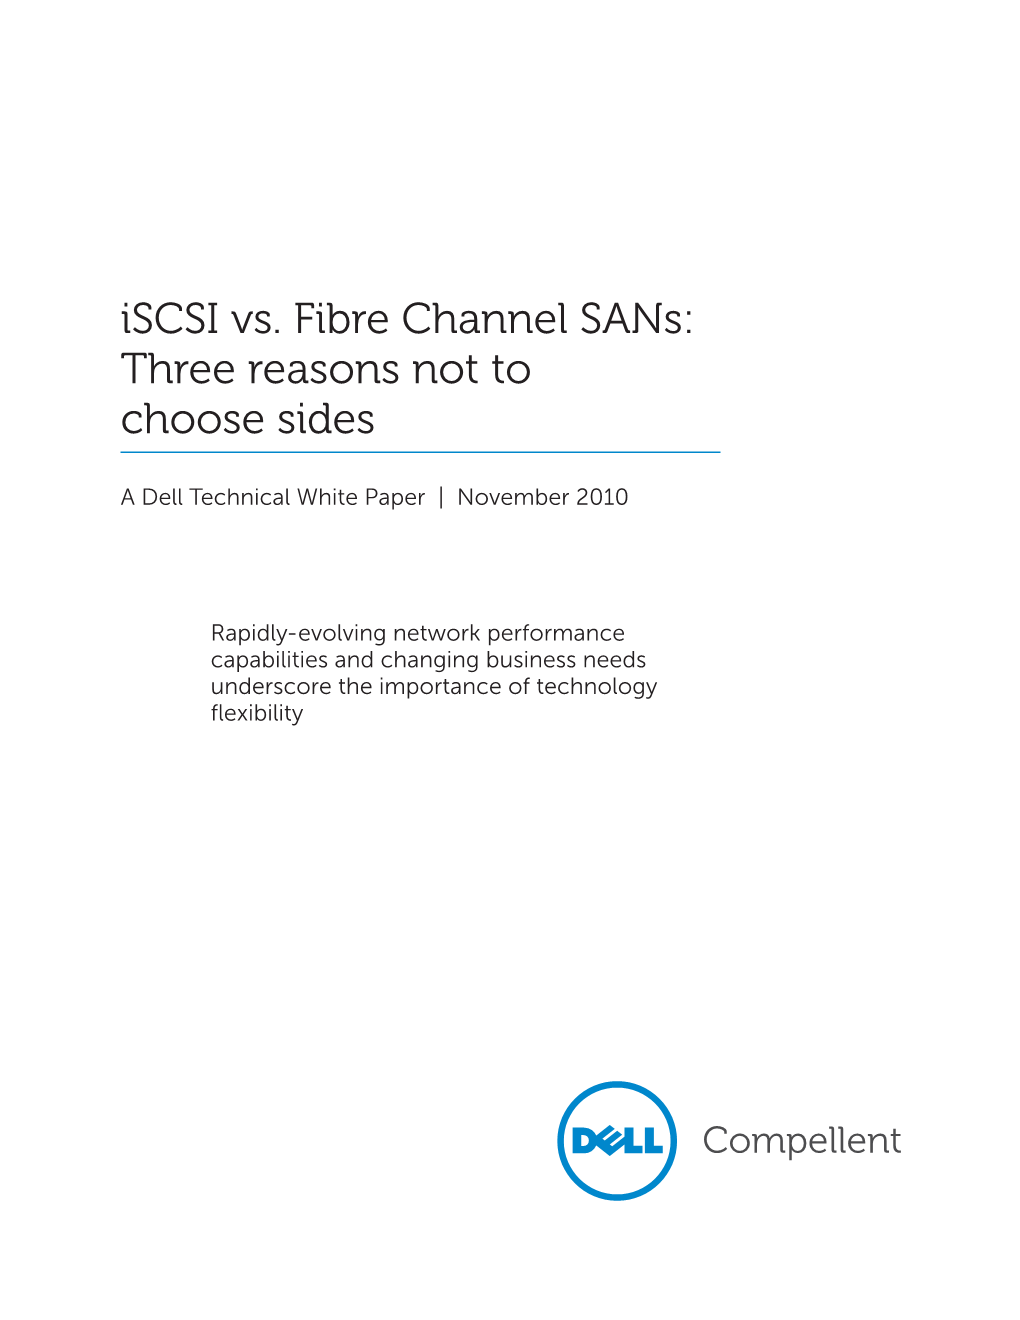 Iscsi Vs. Fibre Channel Sans: Three Reasons Not to Choose Sides